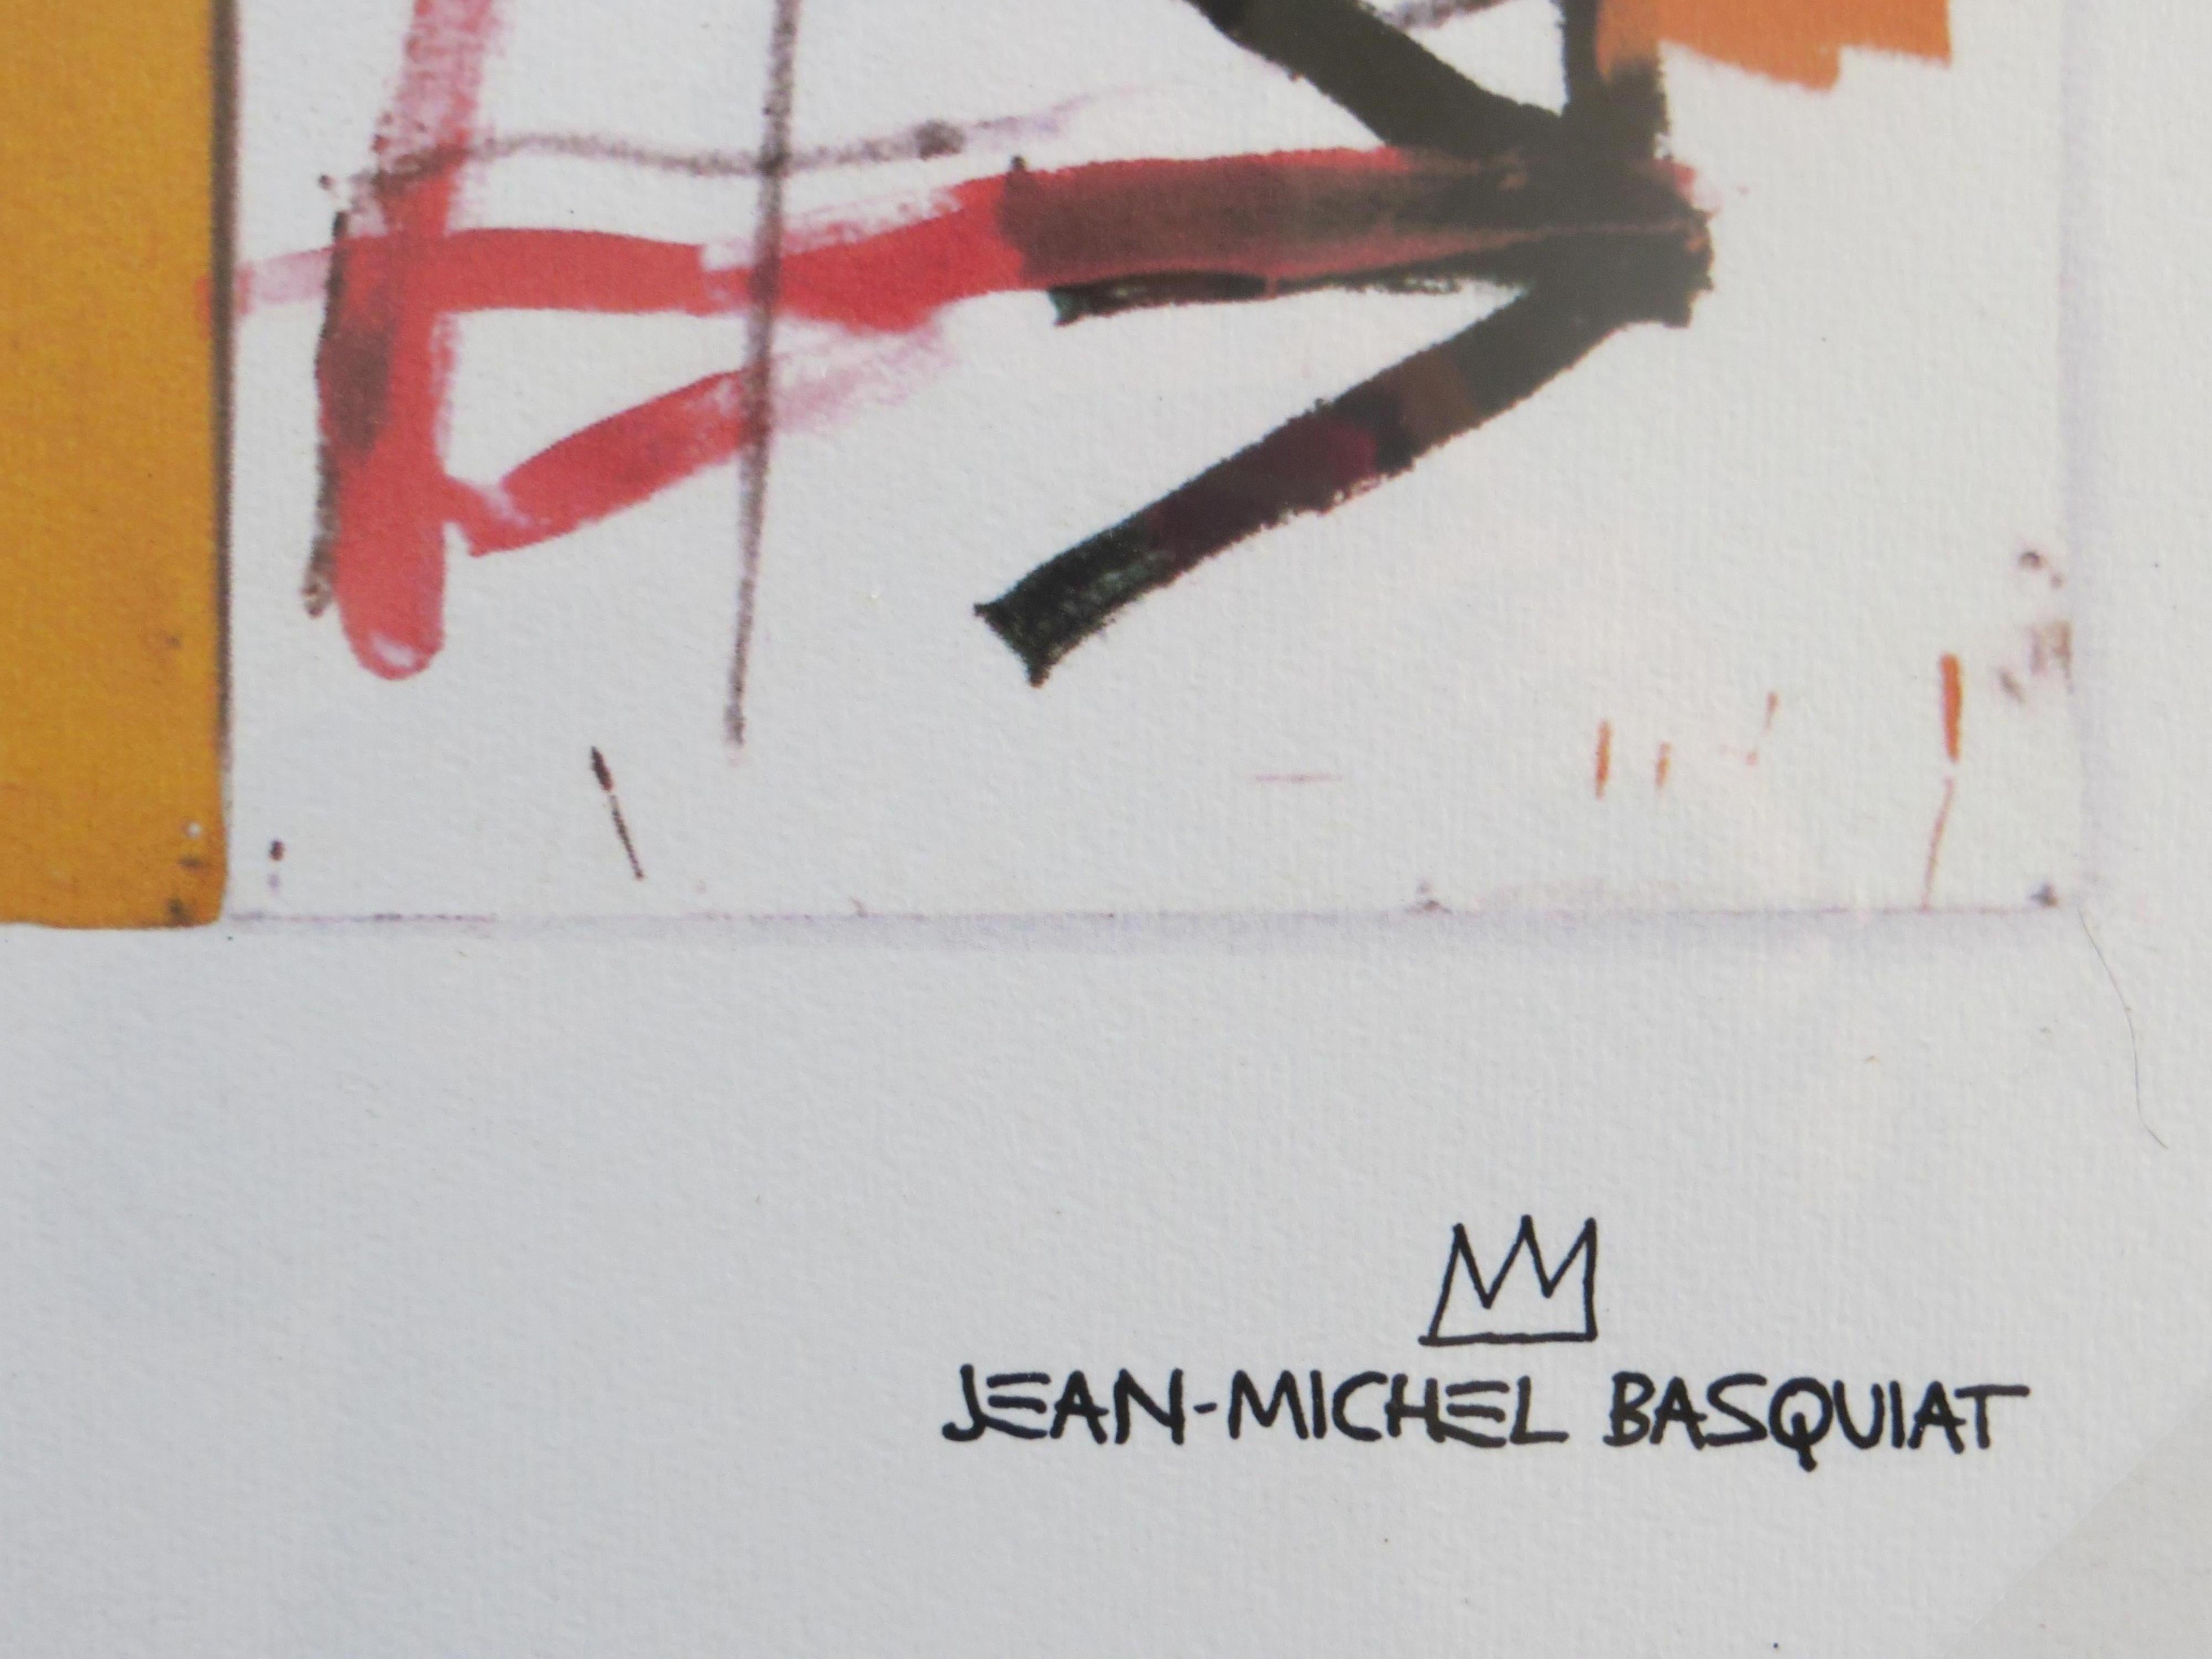 The Estate of Jean-Michel Basquiat,  Lithograph 126/300 - Print by after Jean-Michel Basquiat